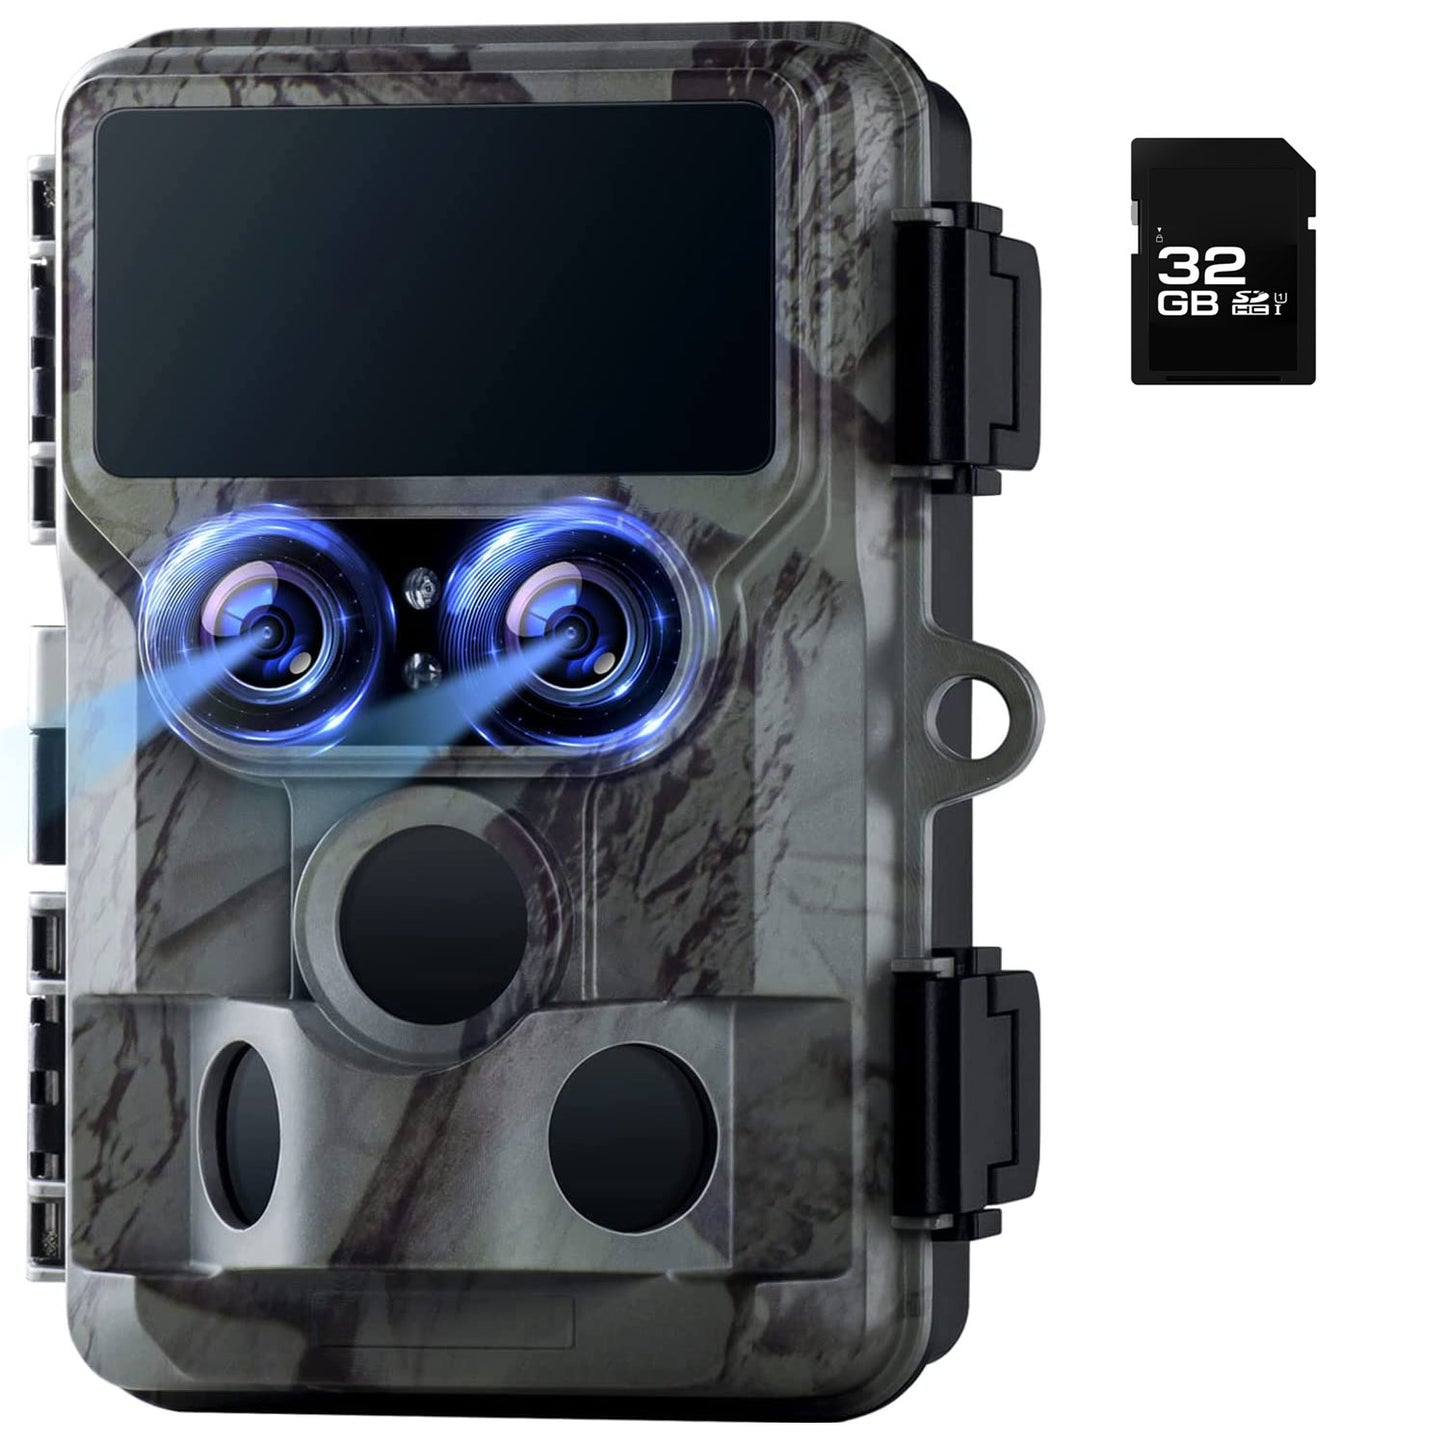 CAMPARK Native 4K 60MP 30FPS Trail Game Cameras WiFi, Starlight Night Vision Dual Lens Bluetooth Waterproof Wildlife Camera with IMX458 Sensors Outdoor Hunting Deer Cam with SD Card